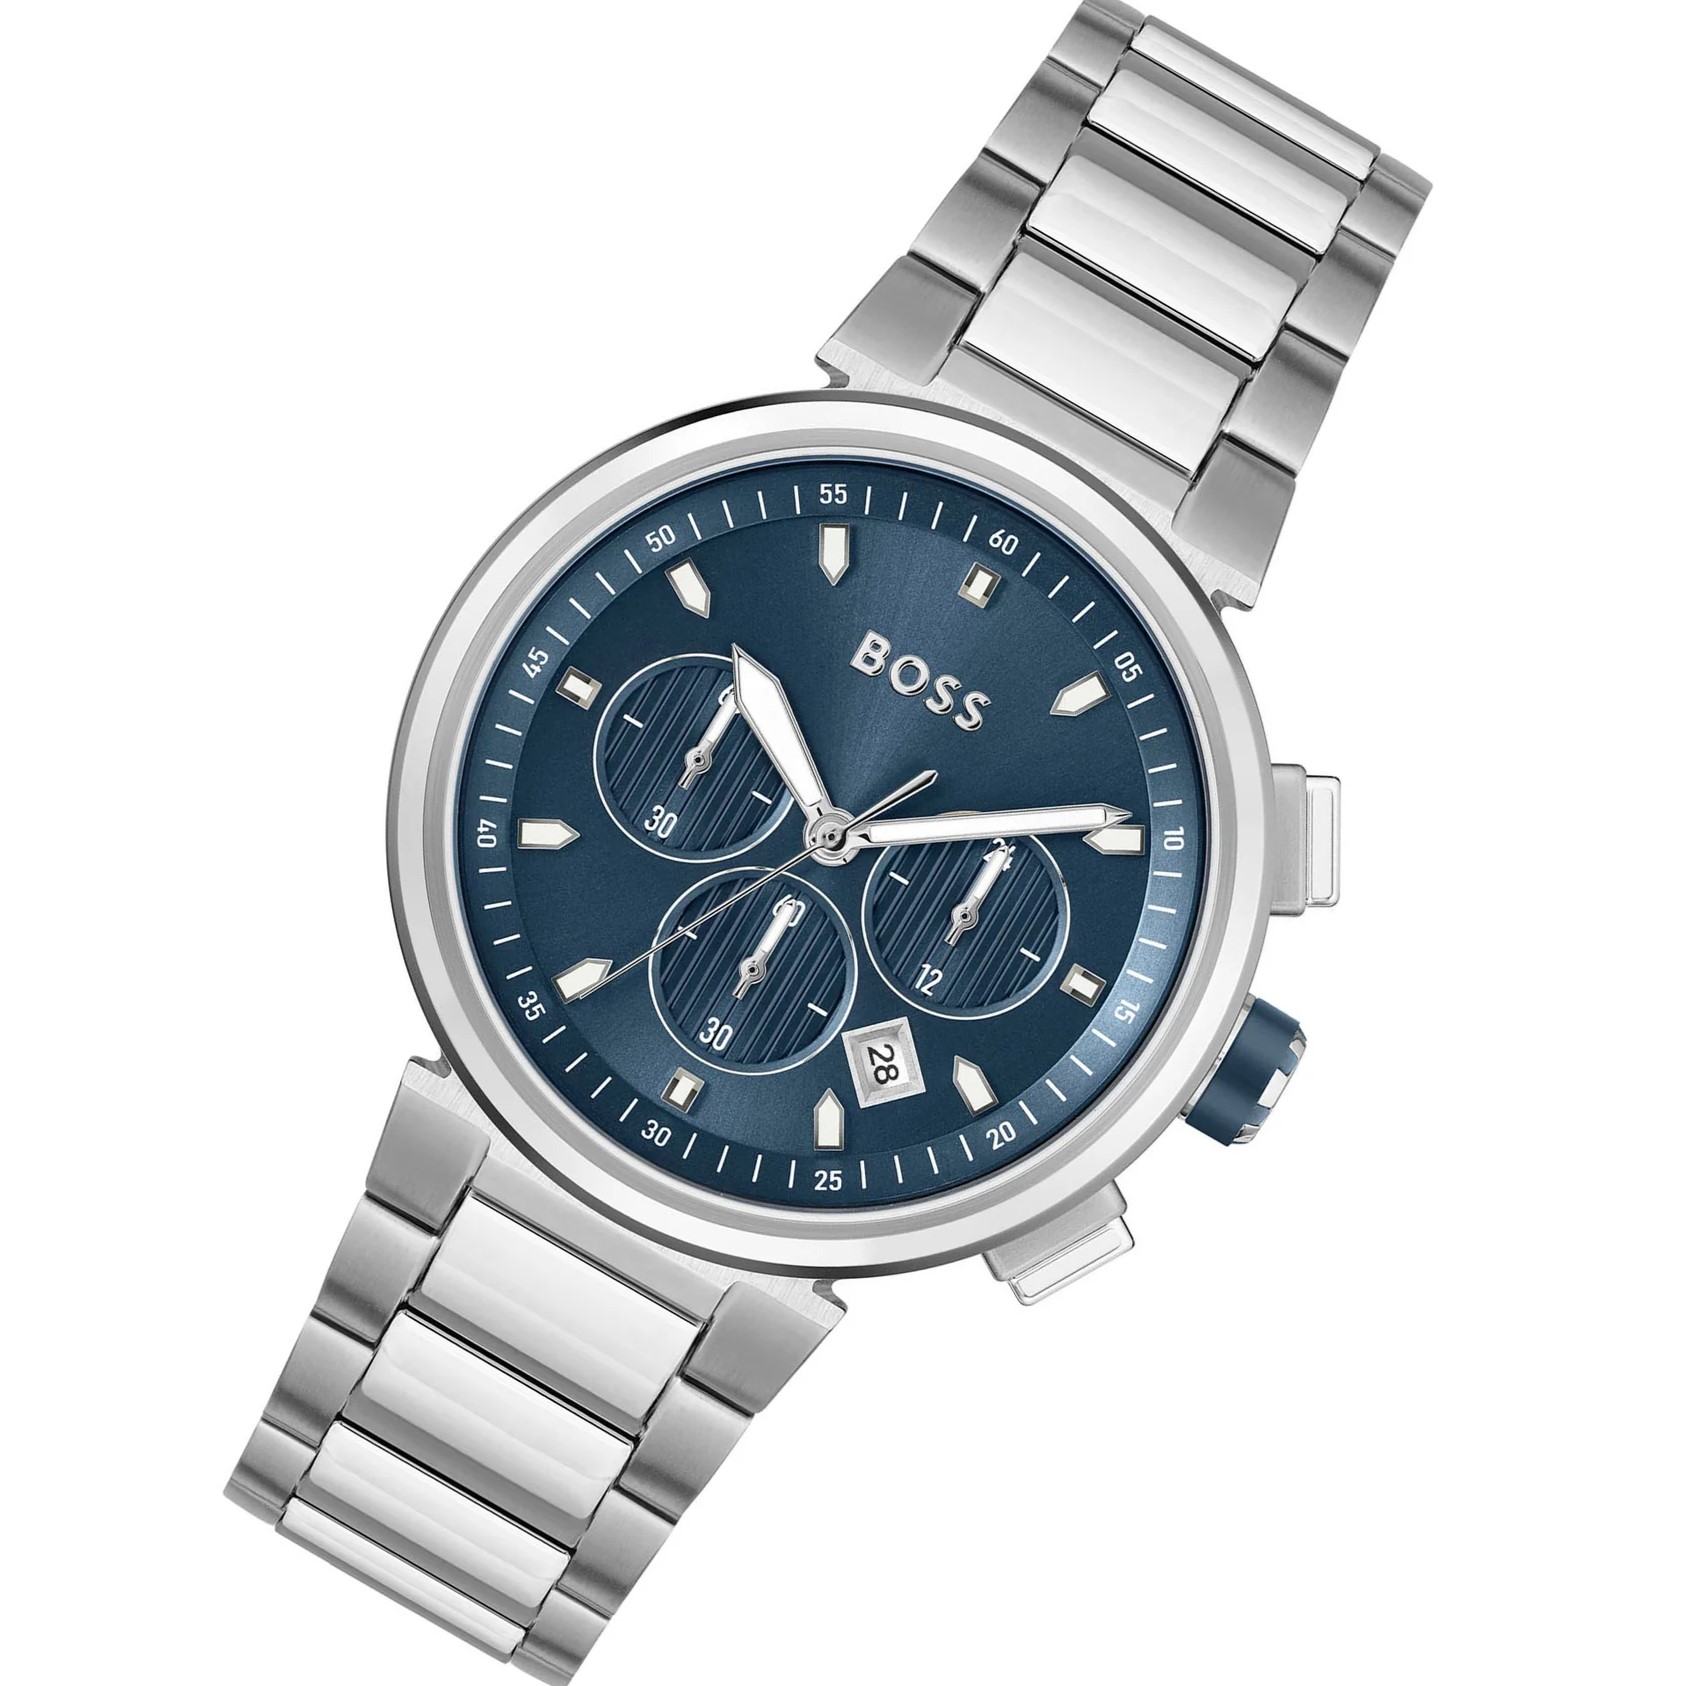 ĐỒNG HỒ NAM HUGO BOSS STAINLESS STEEL BLUE DIAL CHRONOGRAPH MENS WATCH 1513999 4